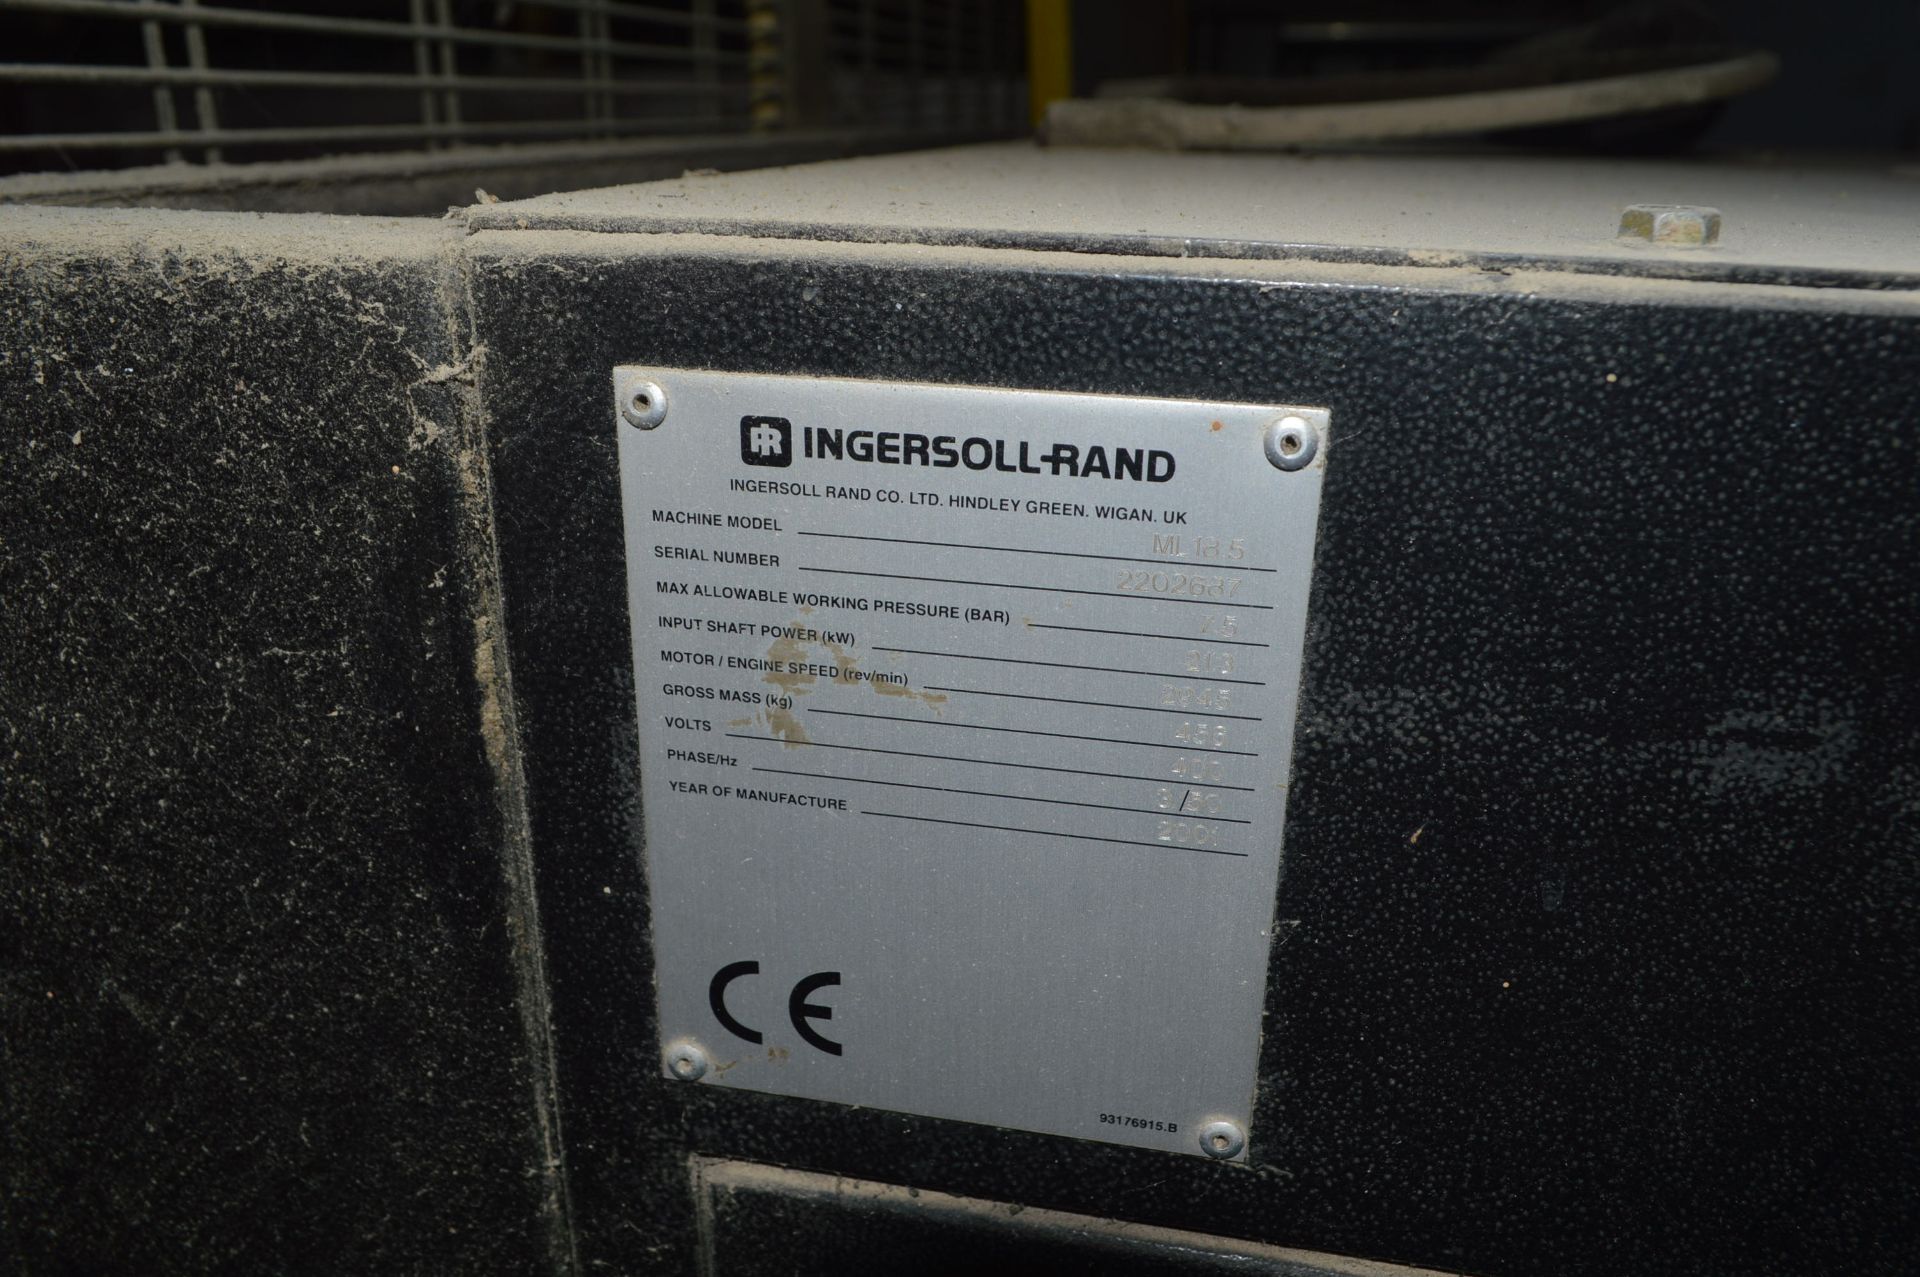 Ingersoll Rand ML18.5 Package Air Compressor, serial no. 2202687, year of manufacture 2001 (not - Image 3 of 3